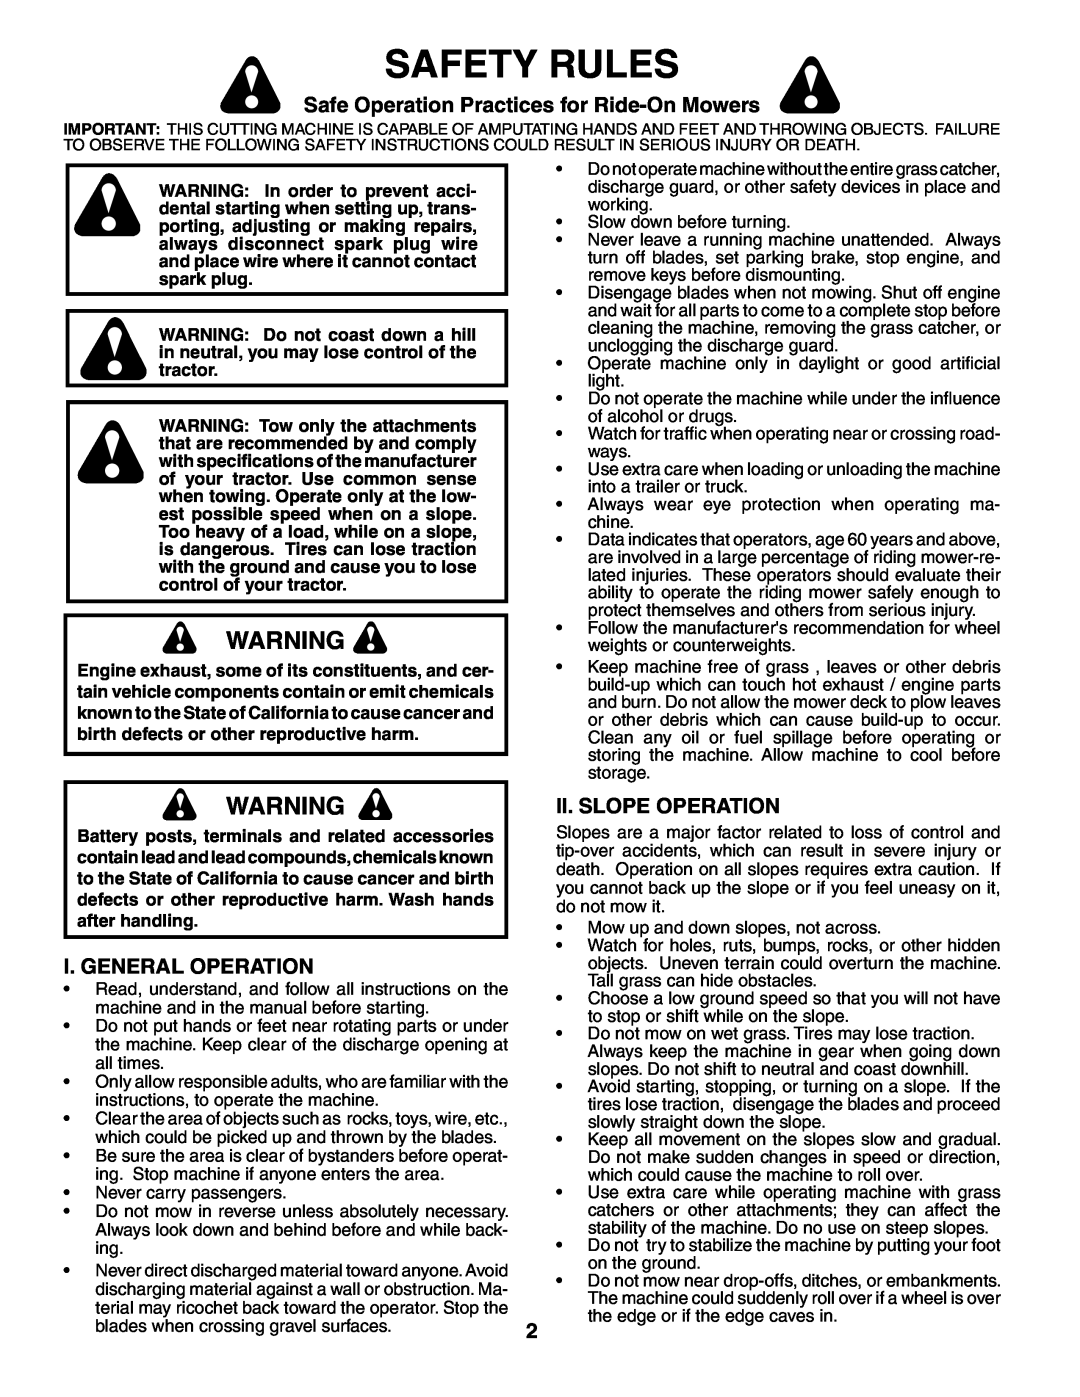 Poulan PK1942YT manual Safety Rules, Safe Operation Practices for Ride-On Mowers, I. General Operation, Ii. Slope Operation 